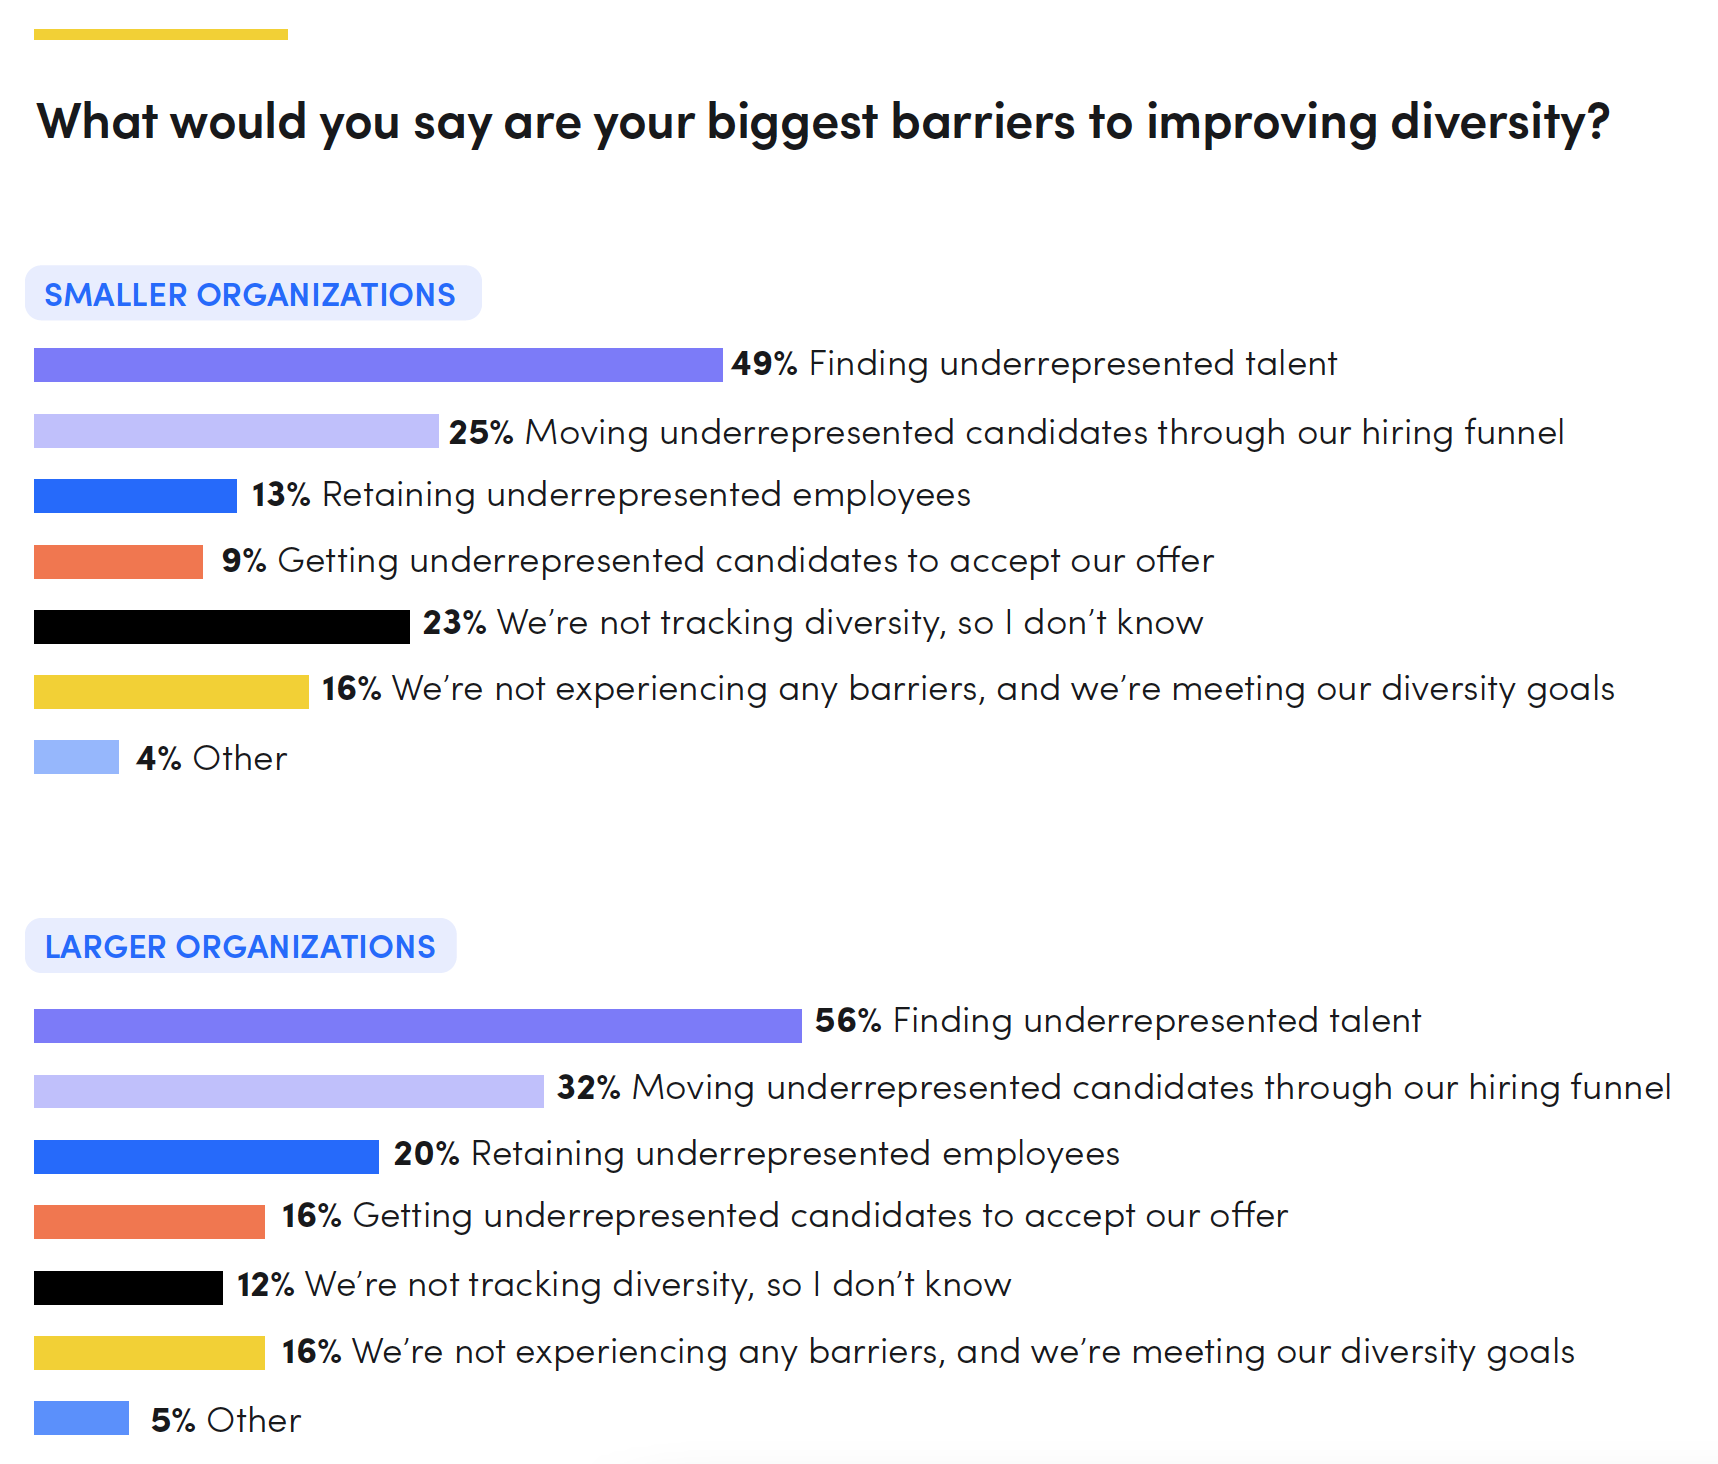 Barriers to diversity